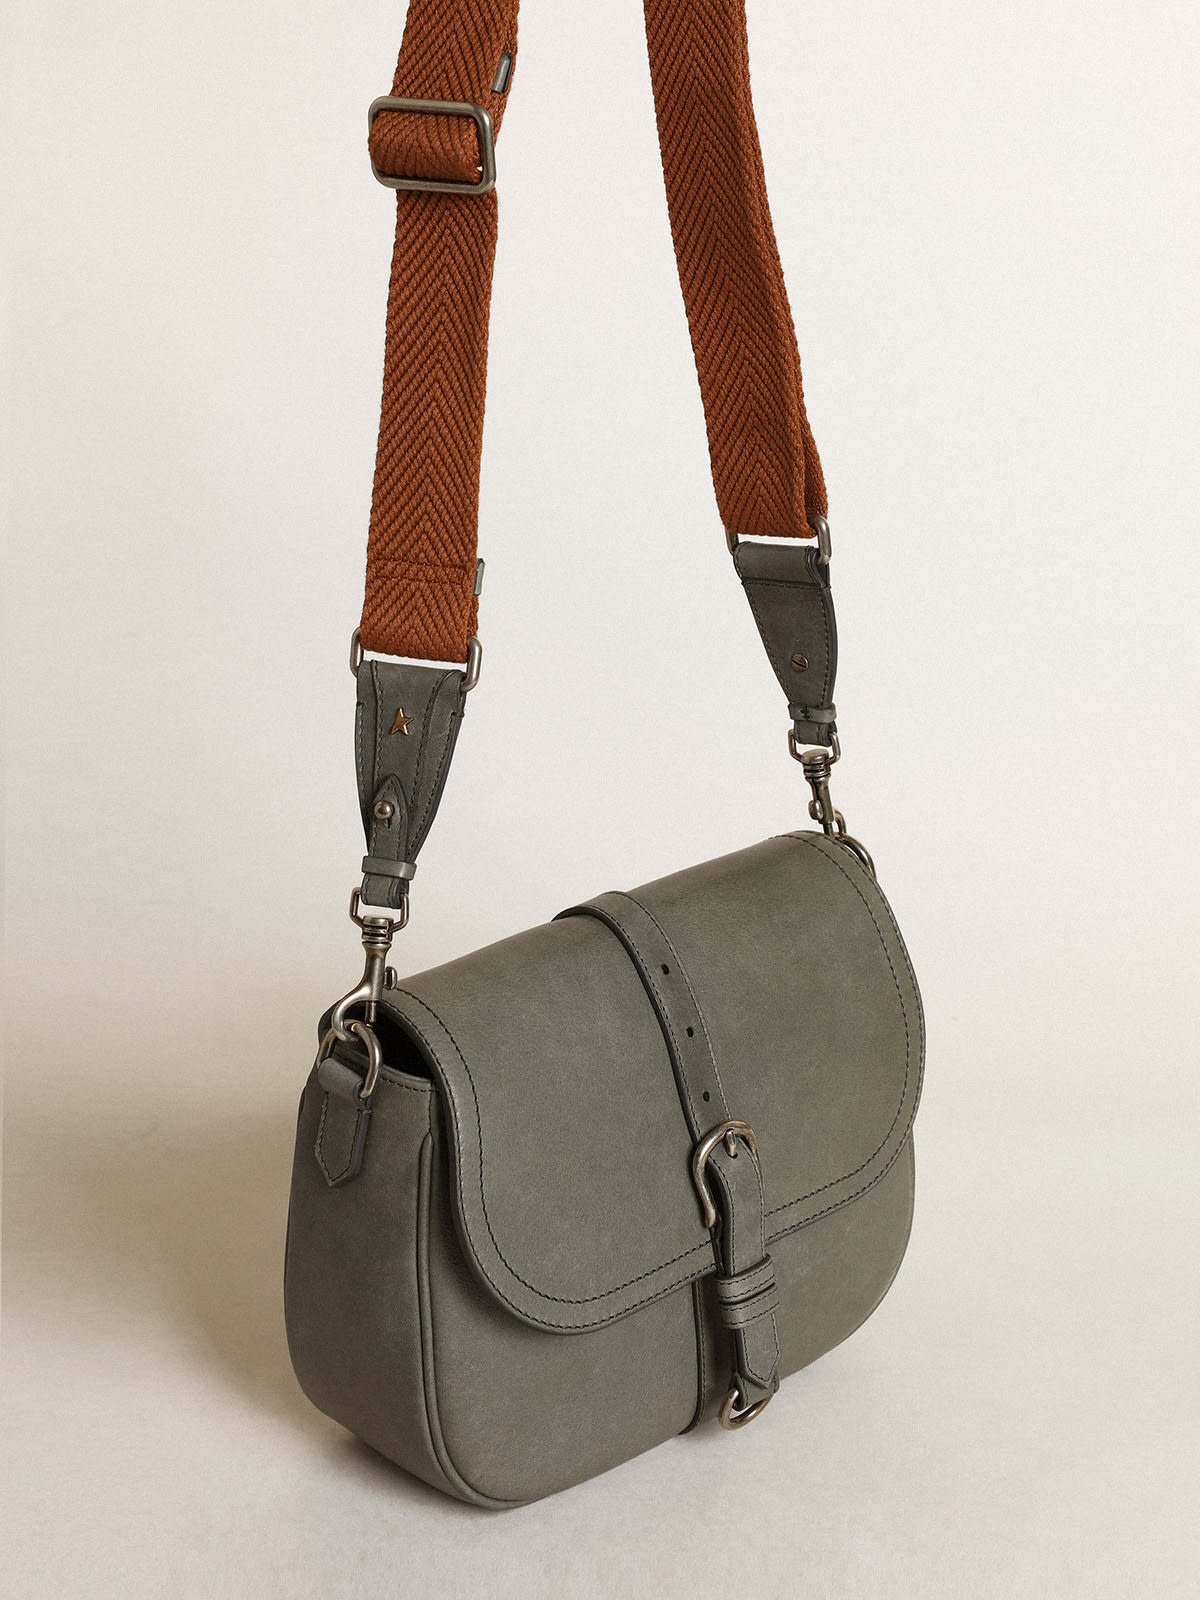 Golden Goose - Medium Francis Bag in stone-gray leather with contrasting buckle and shoulder strap in 